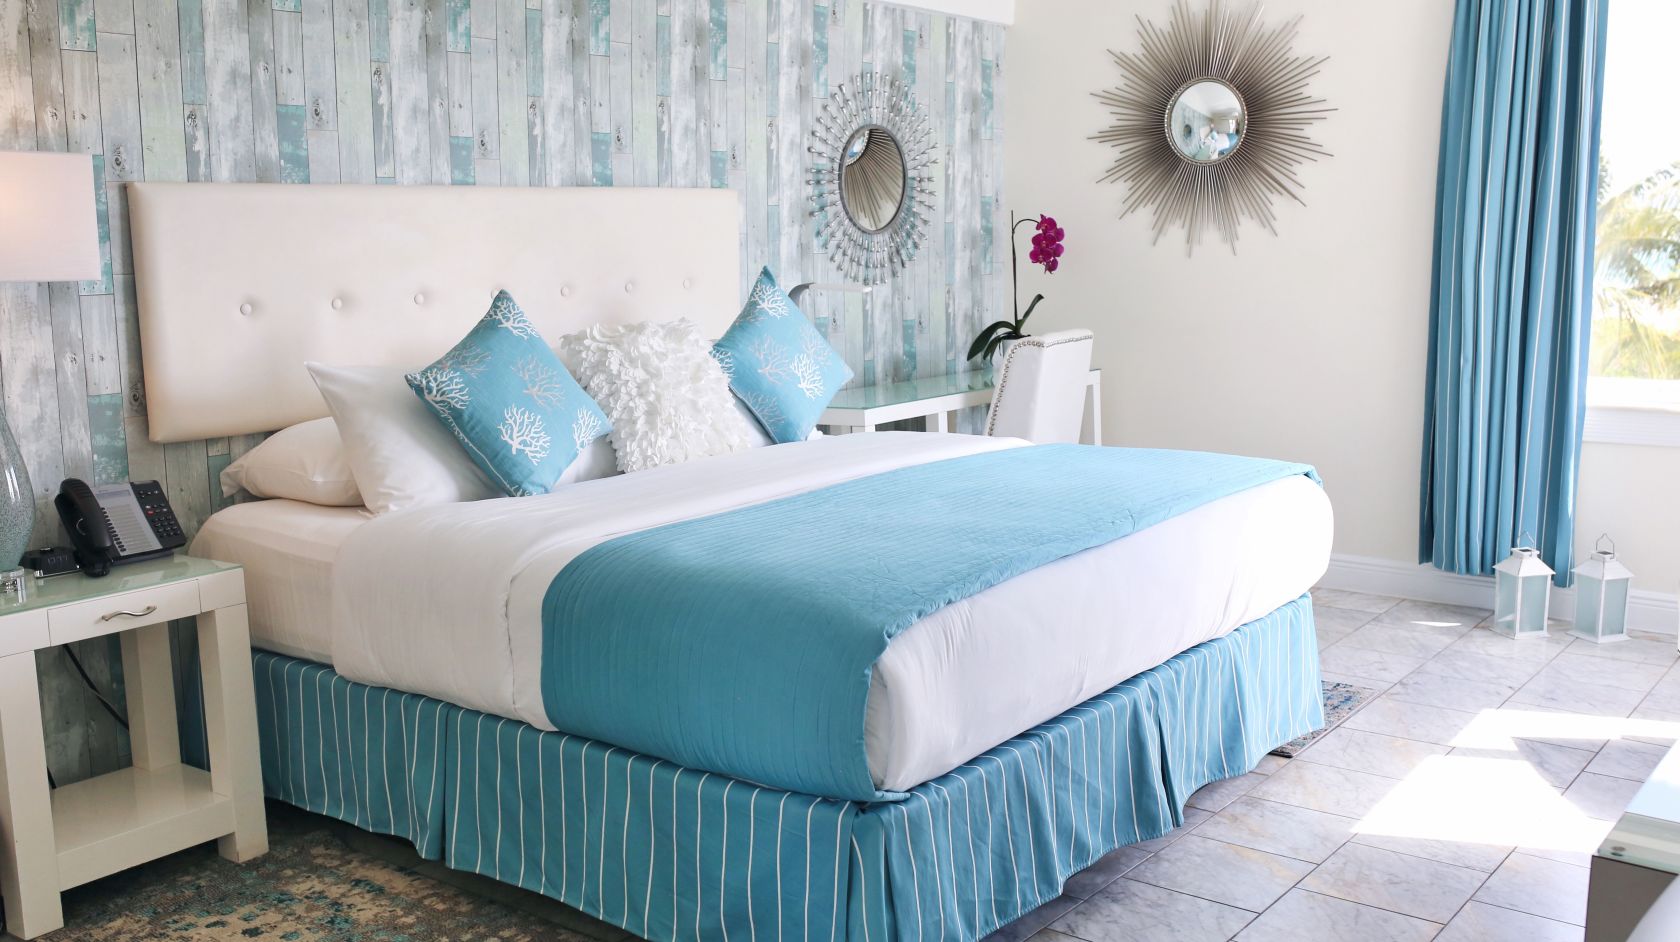 A Blue And White Bed In A Room